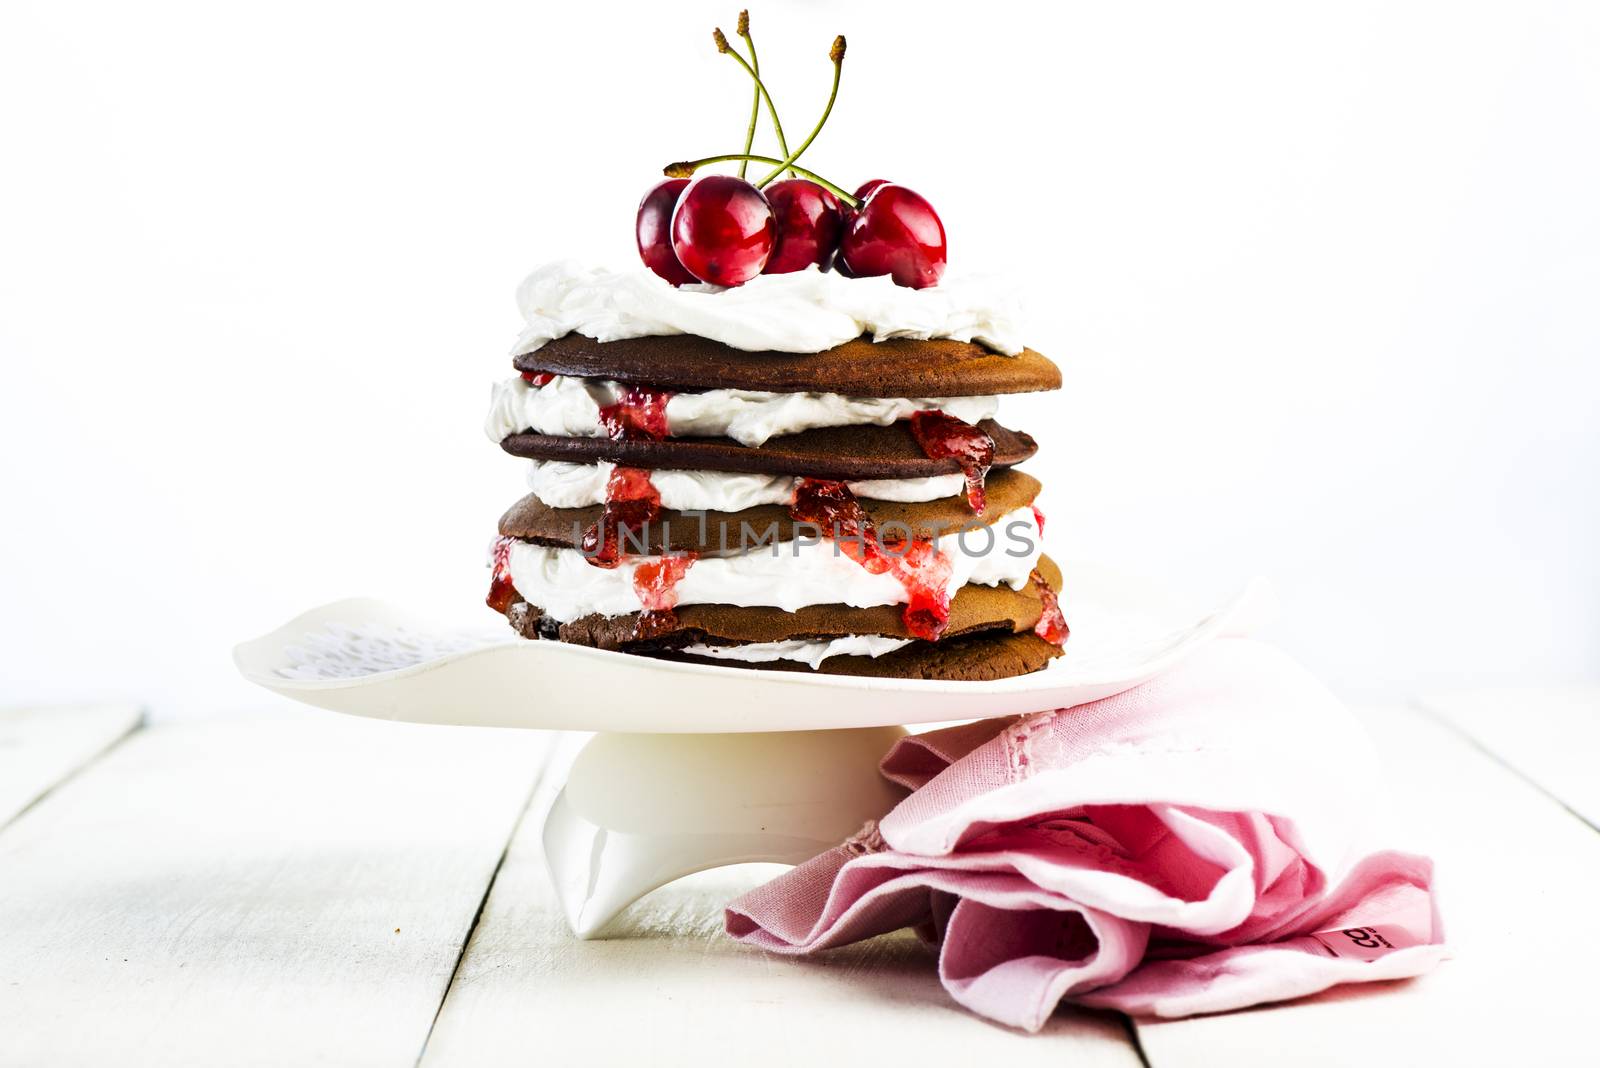 Chocolate cake with cherries and vanilla cream on an white wood table